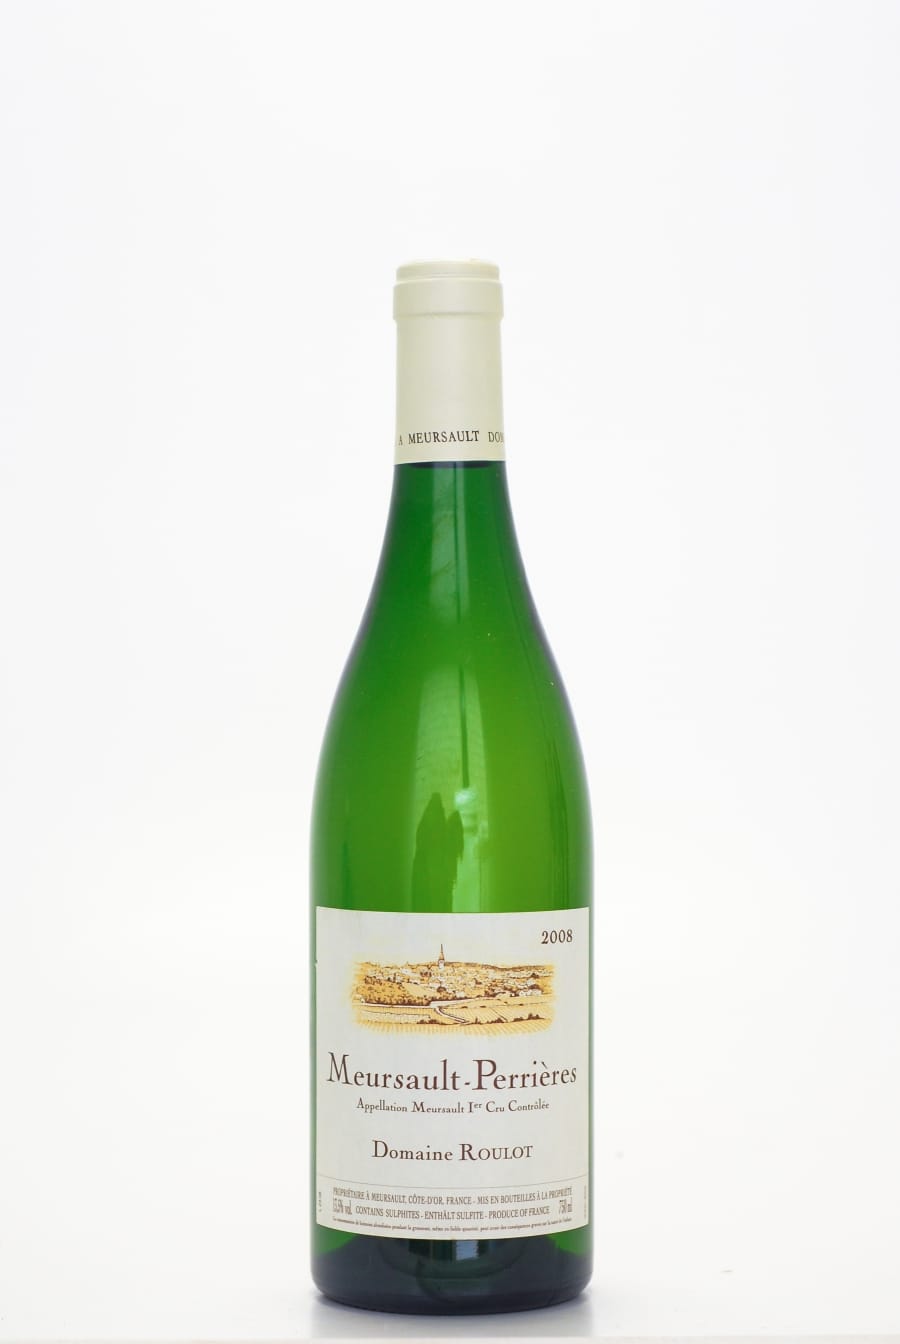 Guy Roulot - Meursault Les Perrieres 2008 Perfect